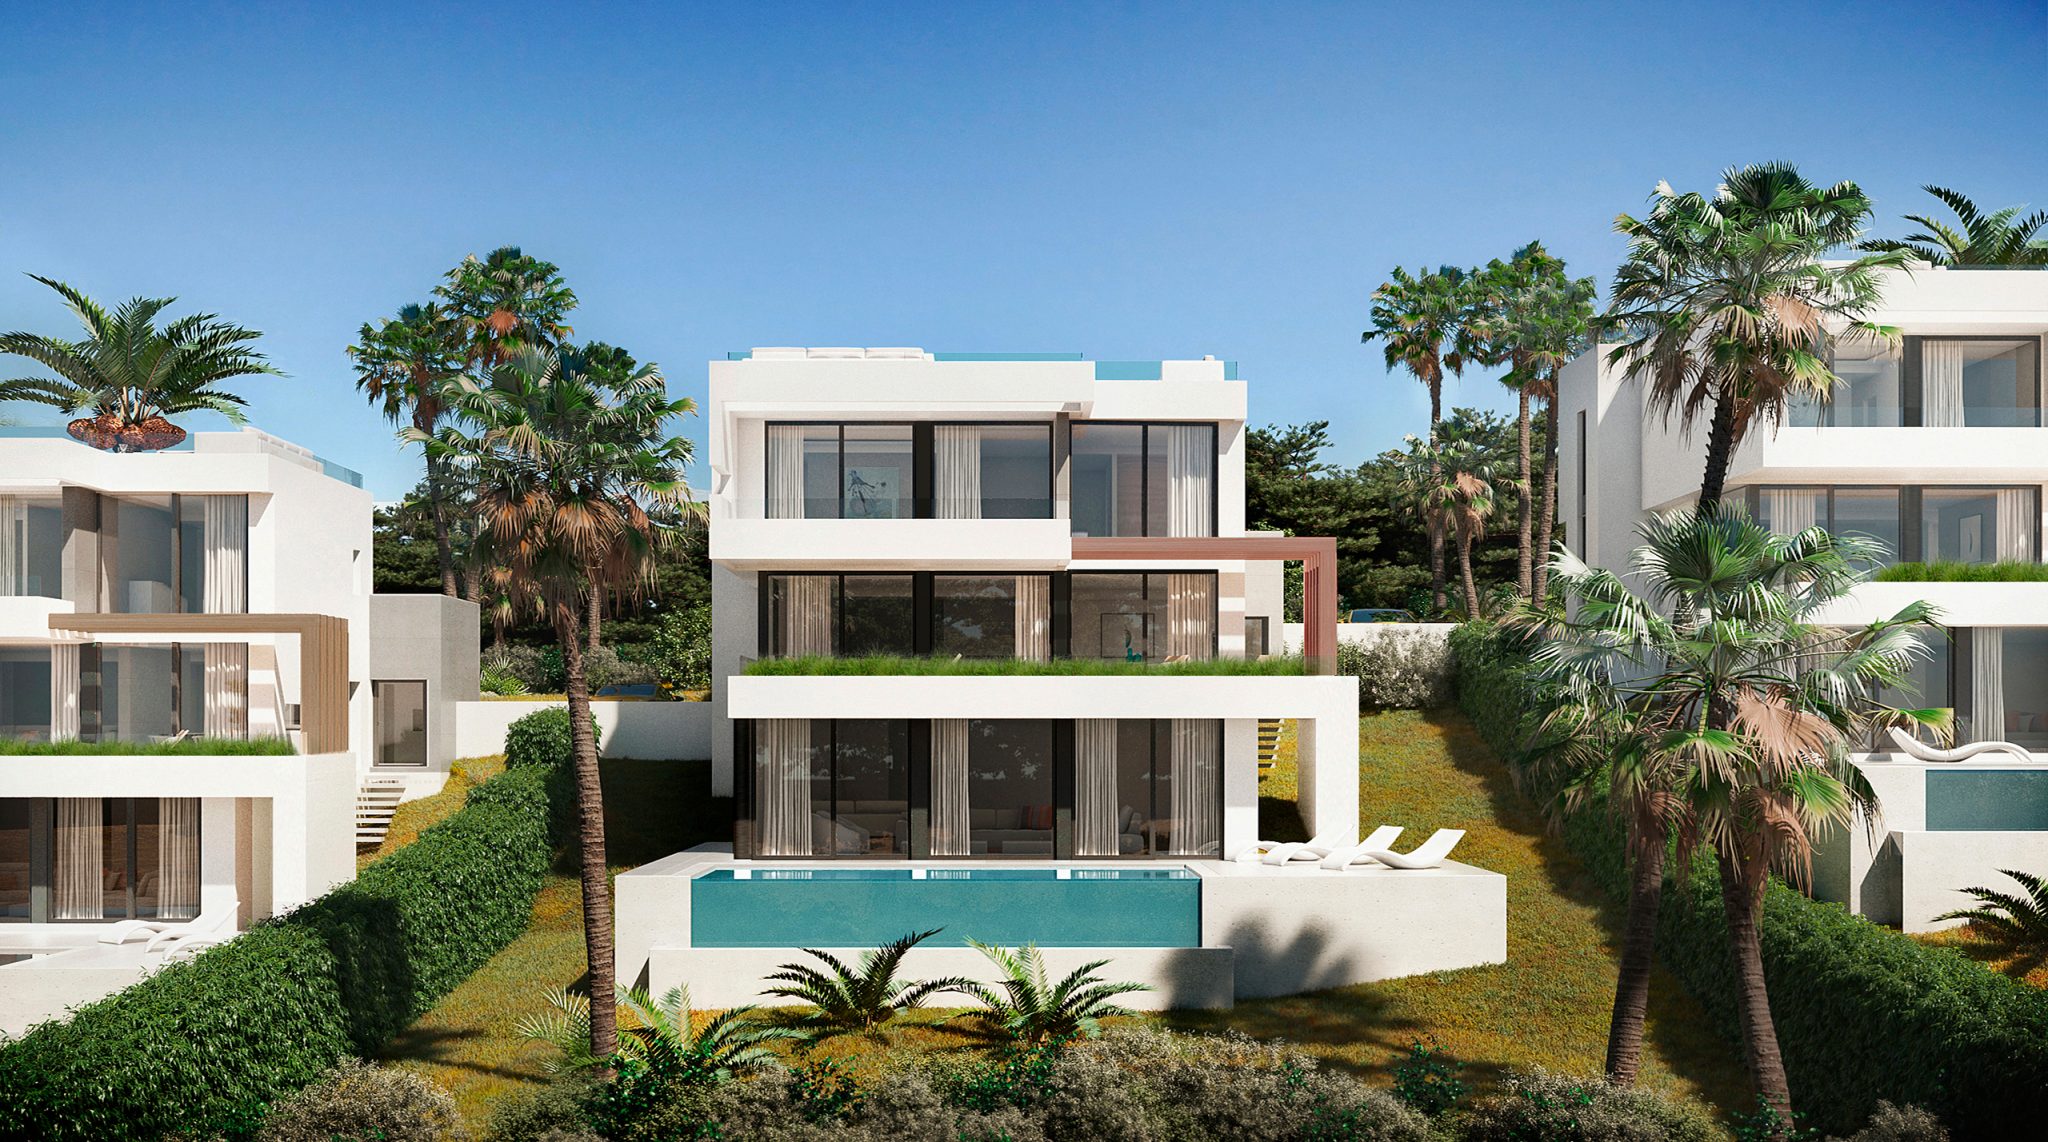 New Build Marbella: The Best Property Investments - Cilo Marbella